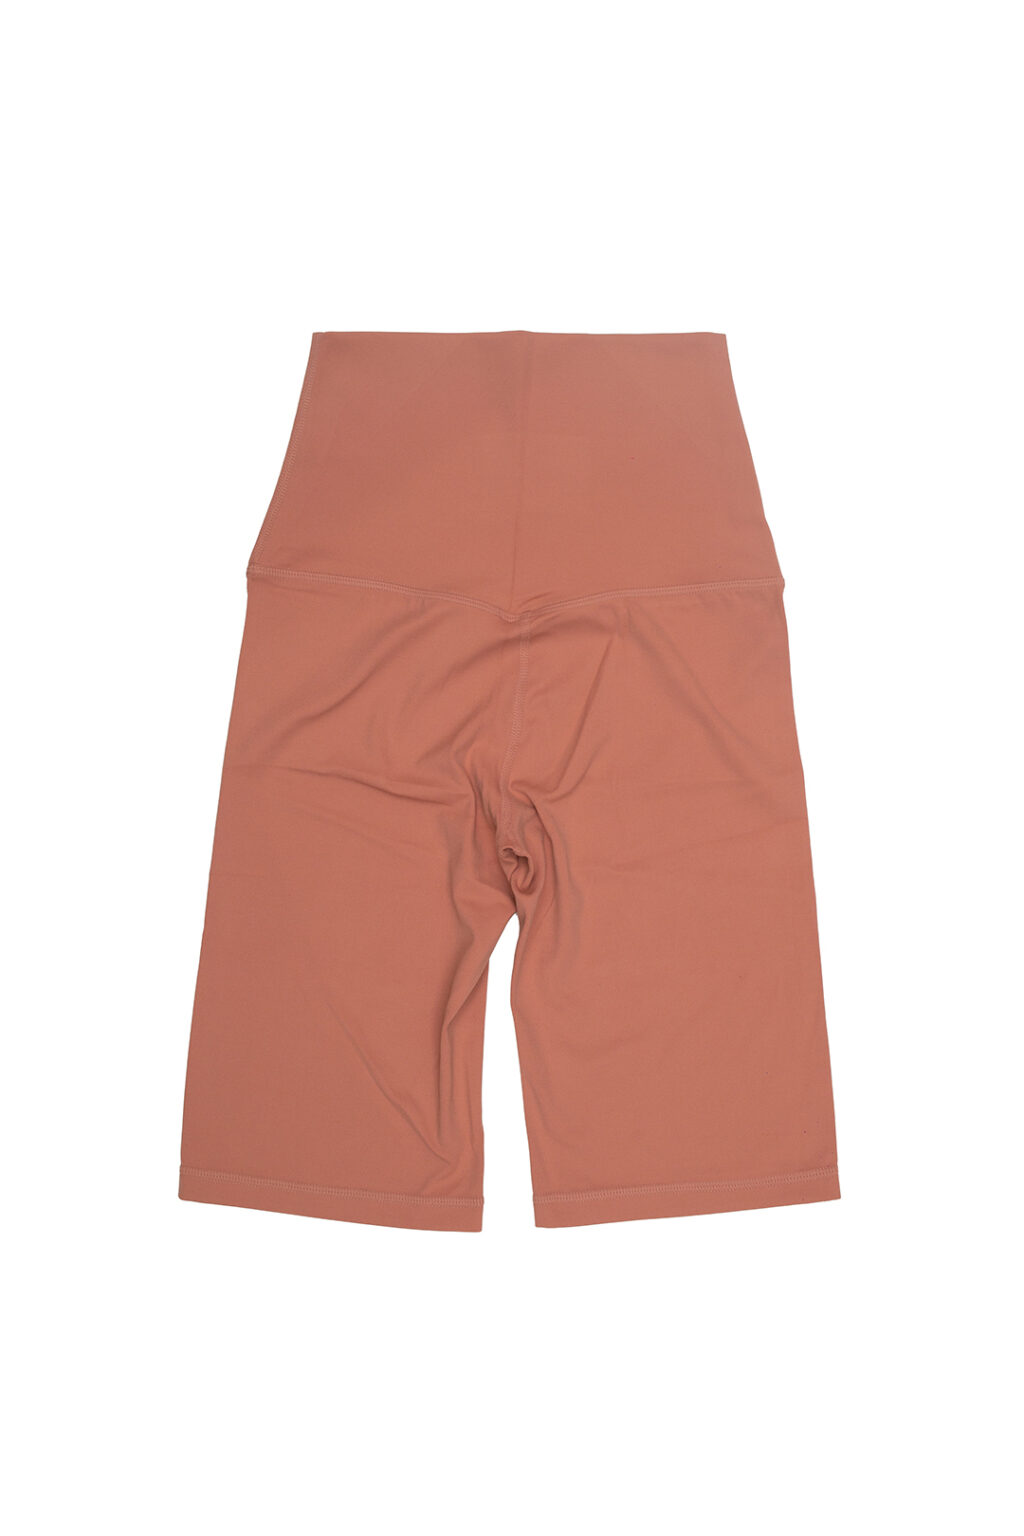 Time Out X Bike Shorts – Coral – Back